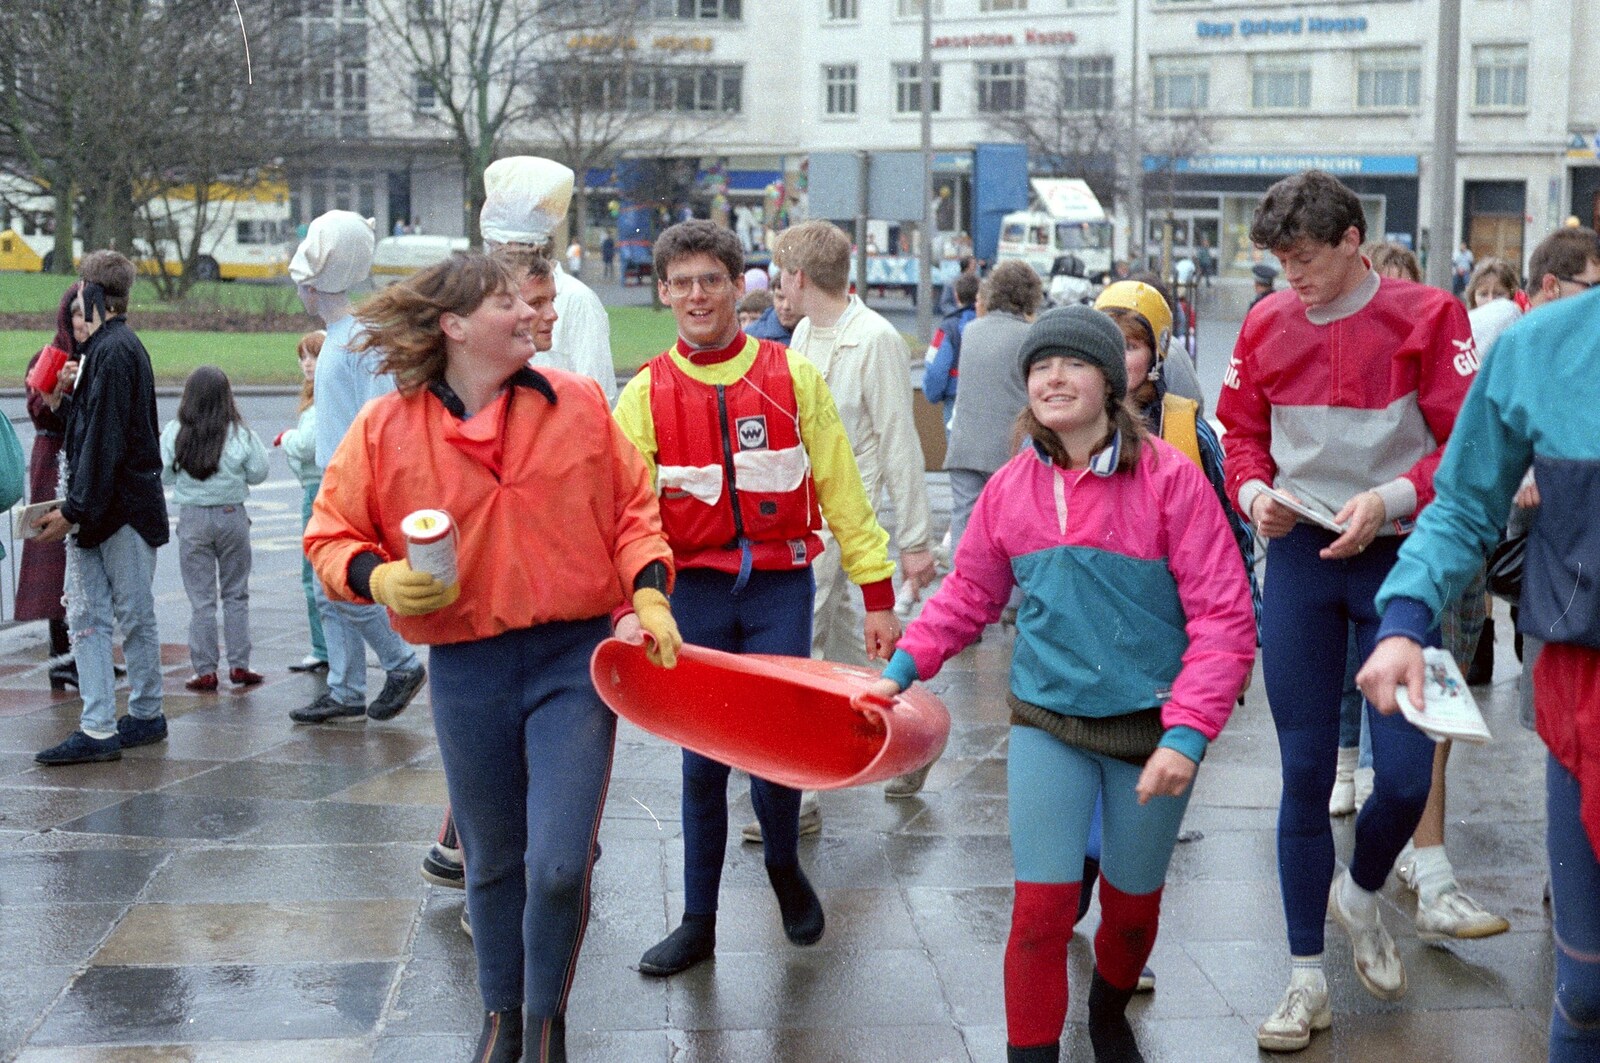 On Derry's Cross roundabout from Uni: The PPSU Pirate RAG Parade, Plymouth, Devon - 14th February 1987